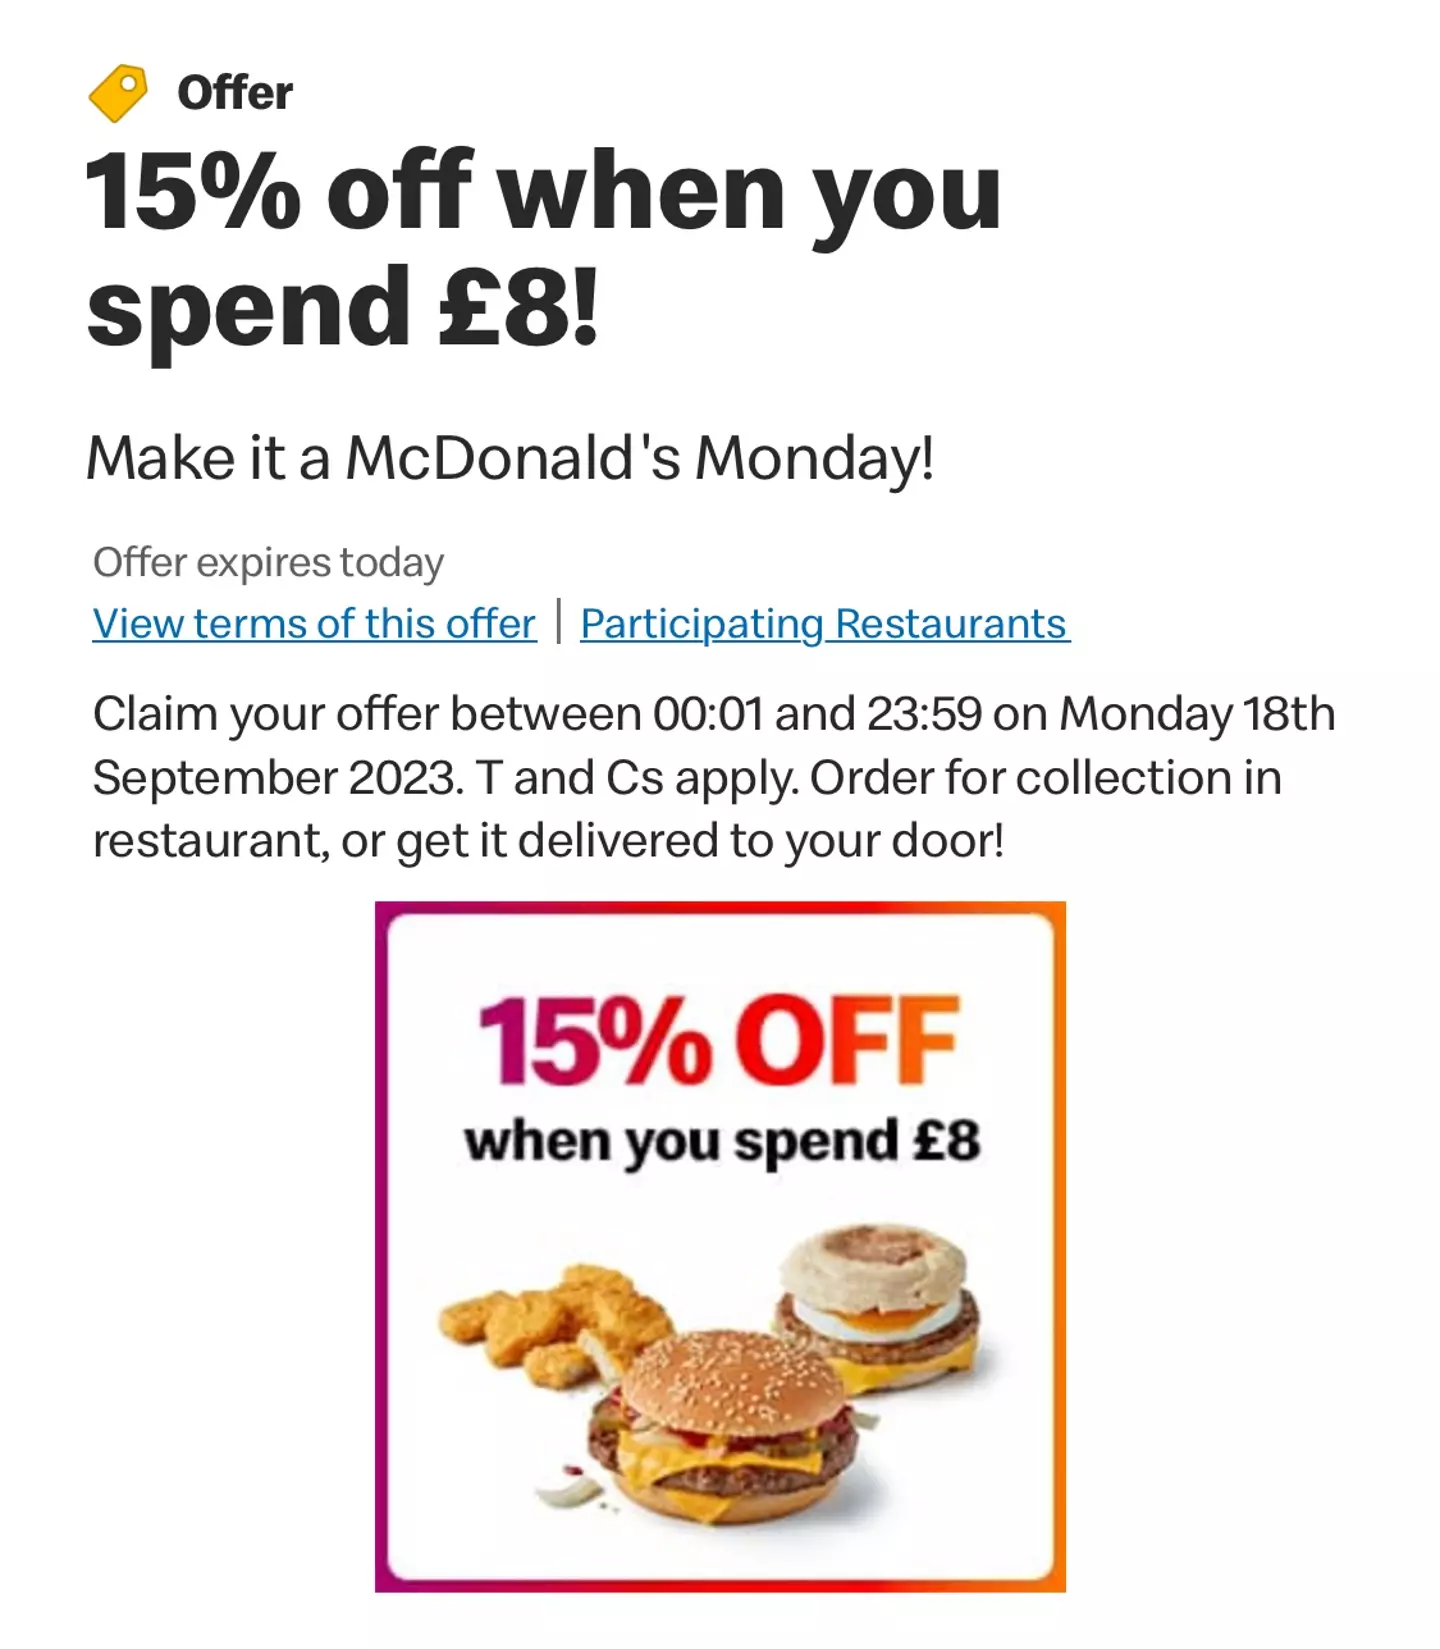 The offer is available on the app for one day only.